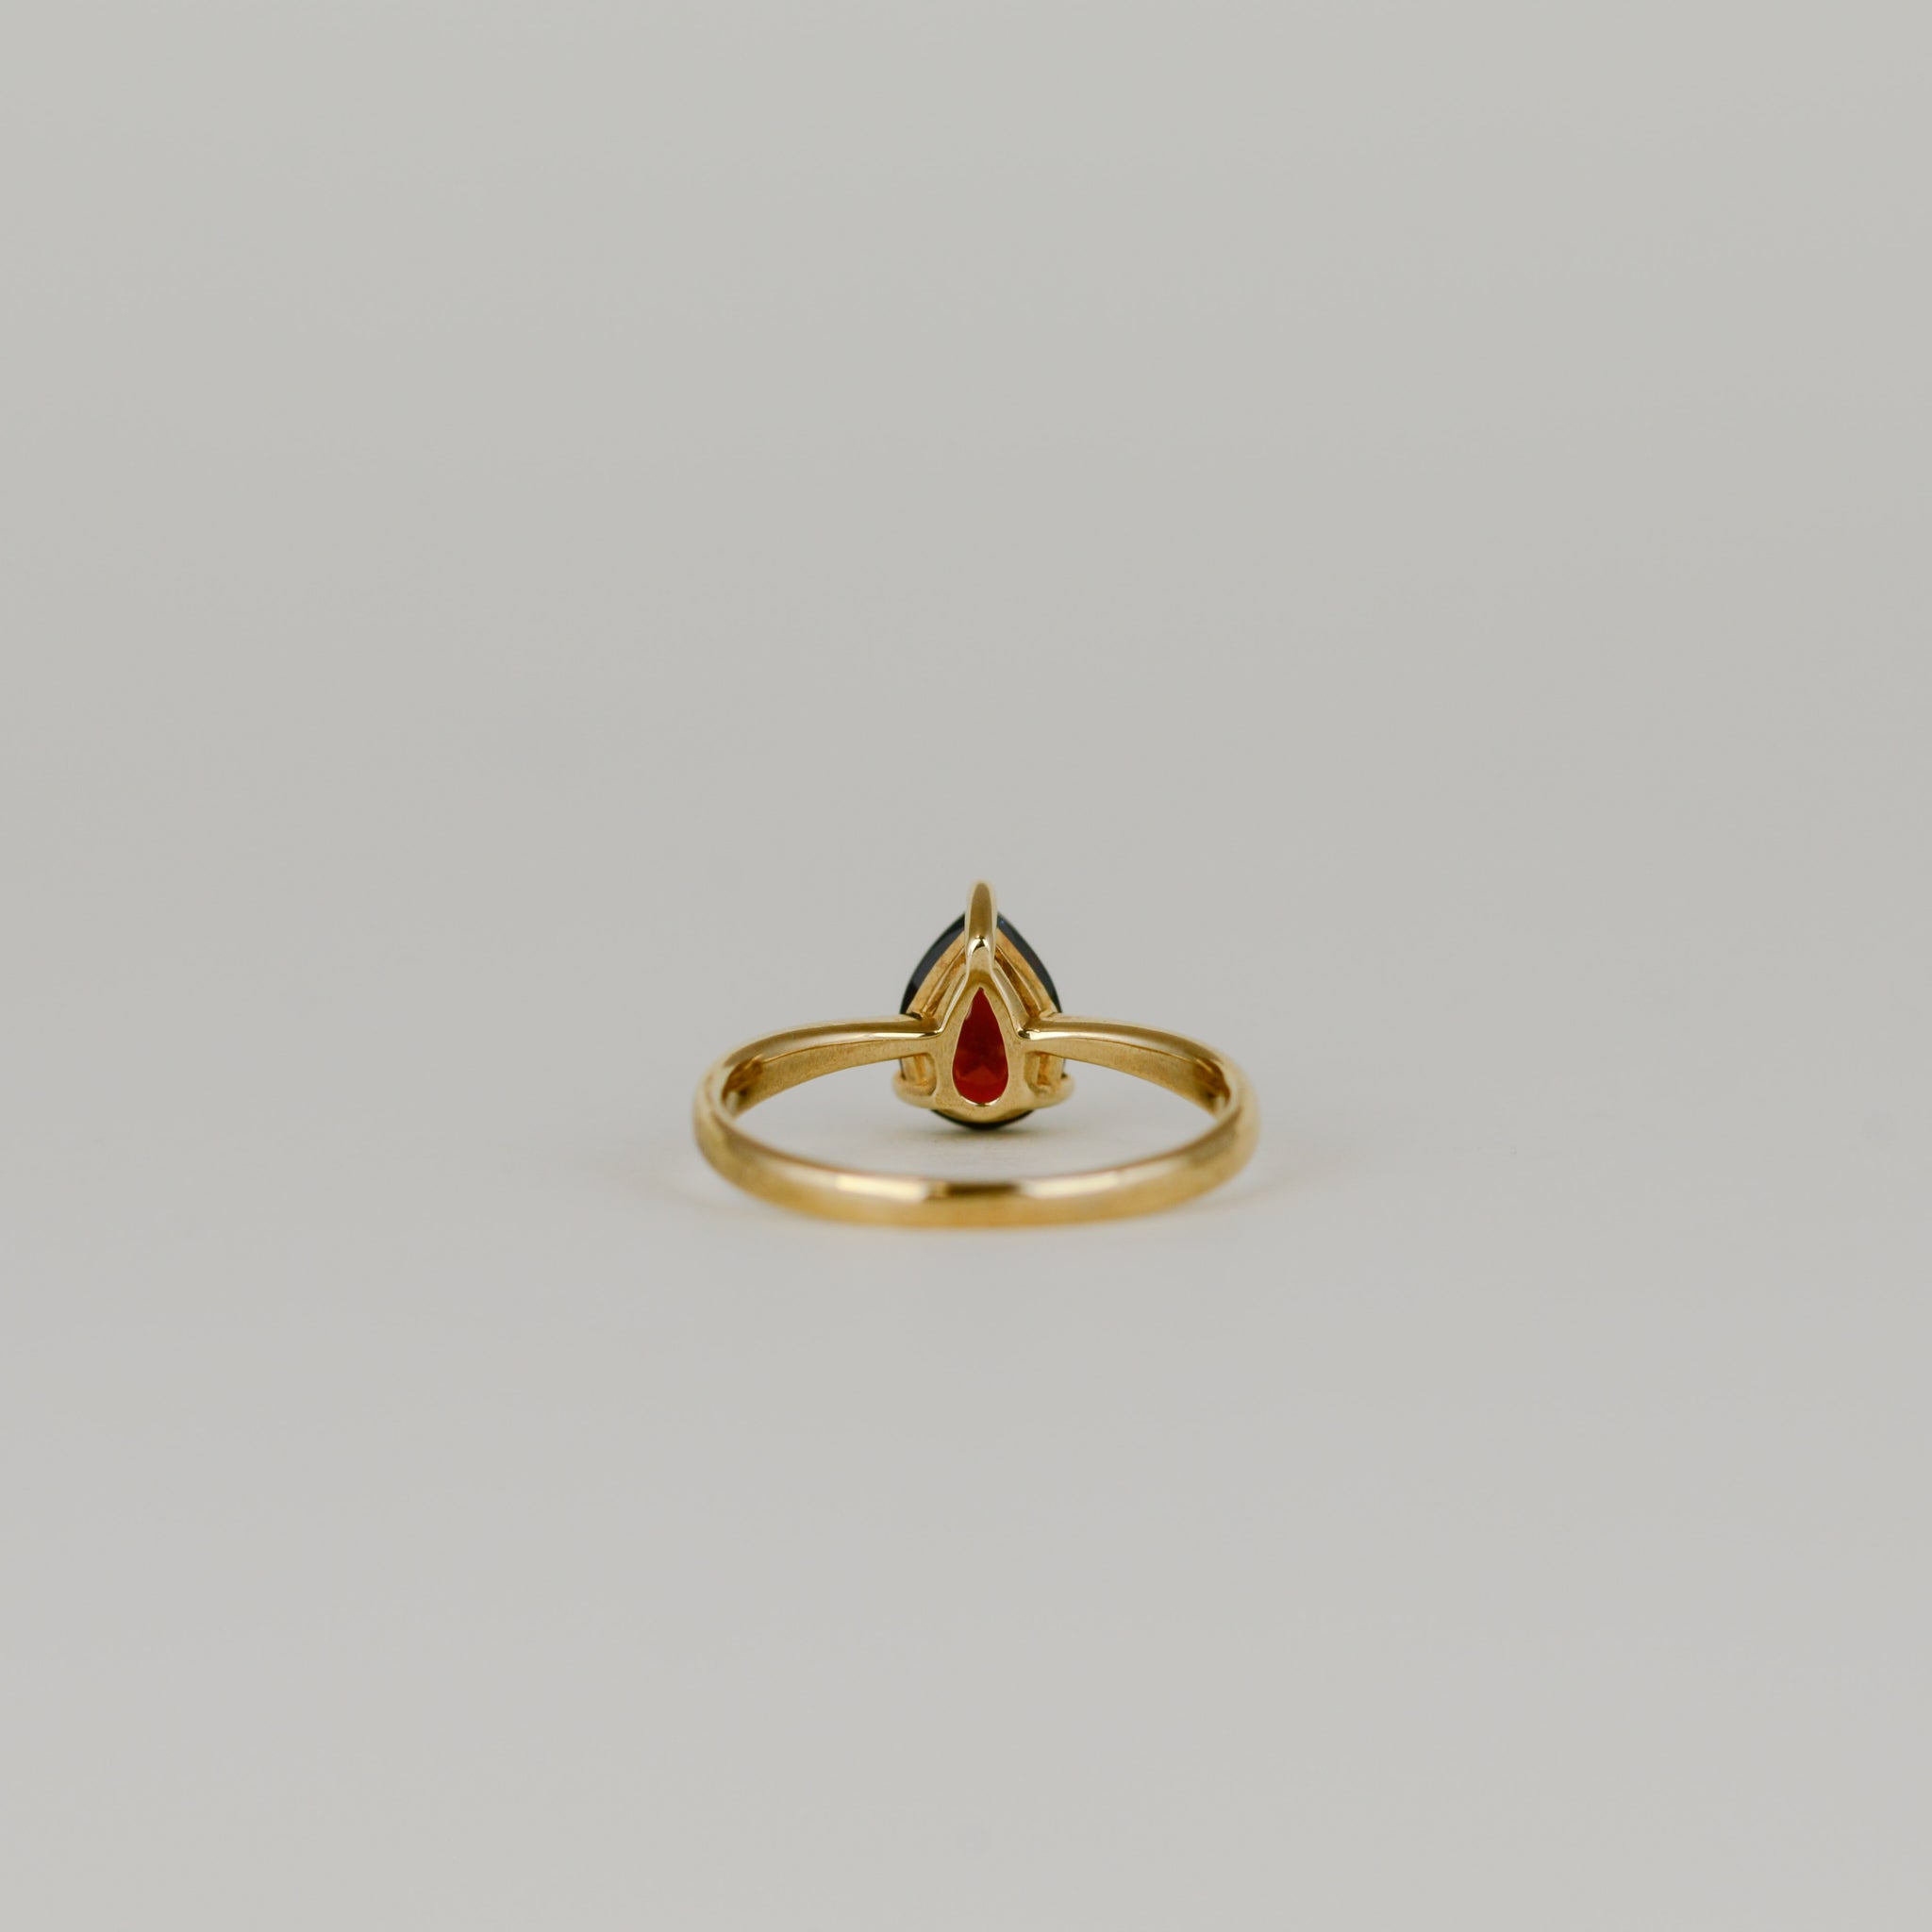 9ct Yellow Gold 1.33ct Pear Cut Garnet Solitaire Ring